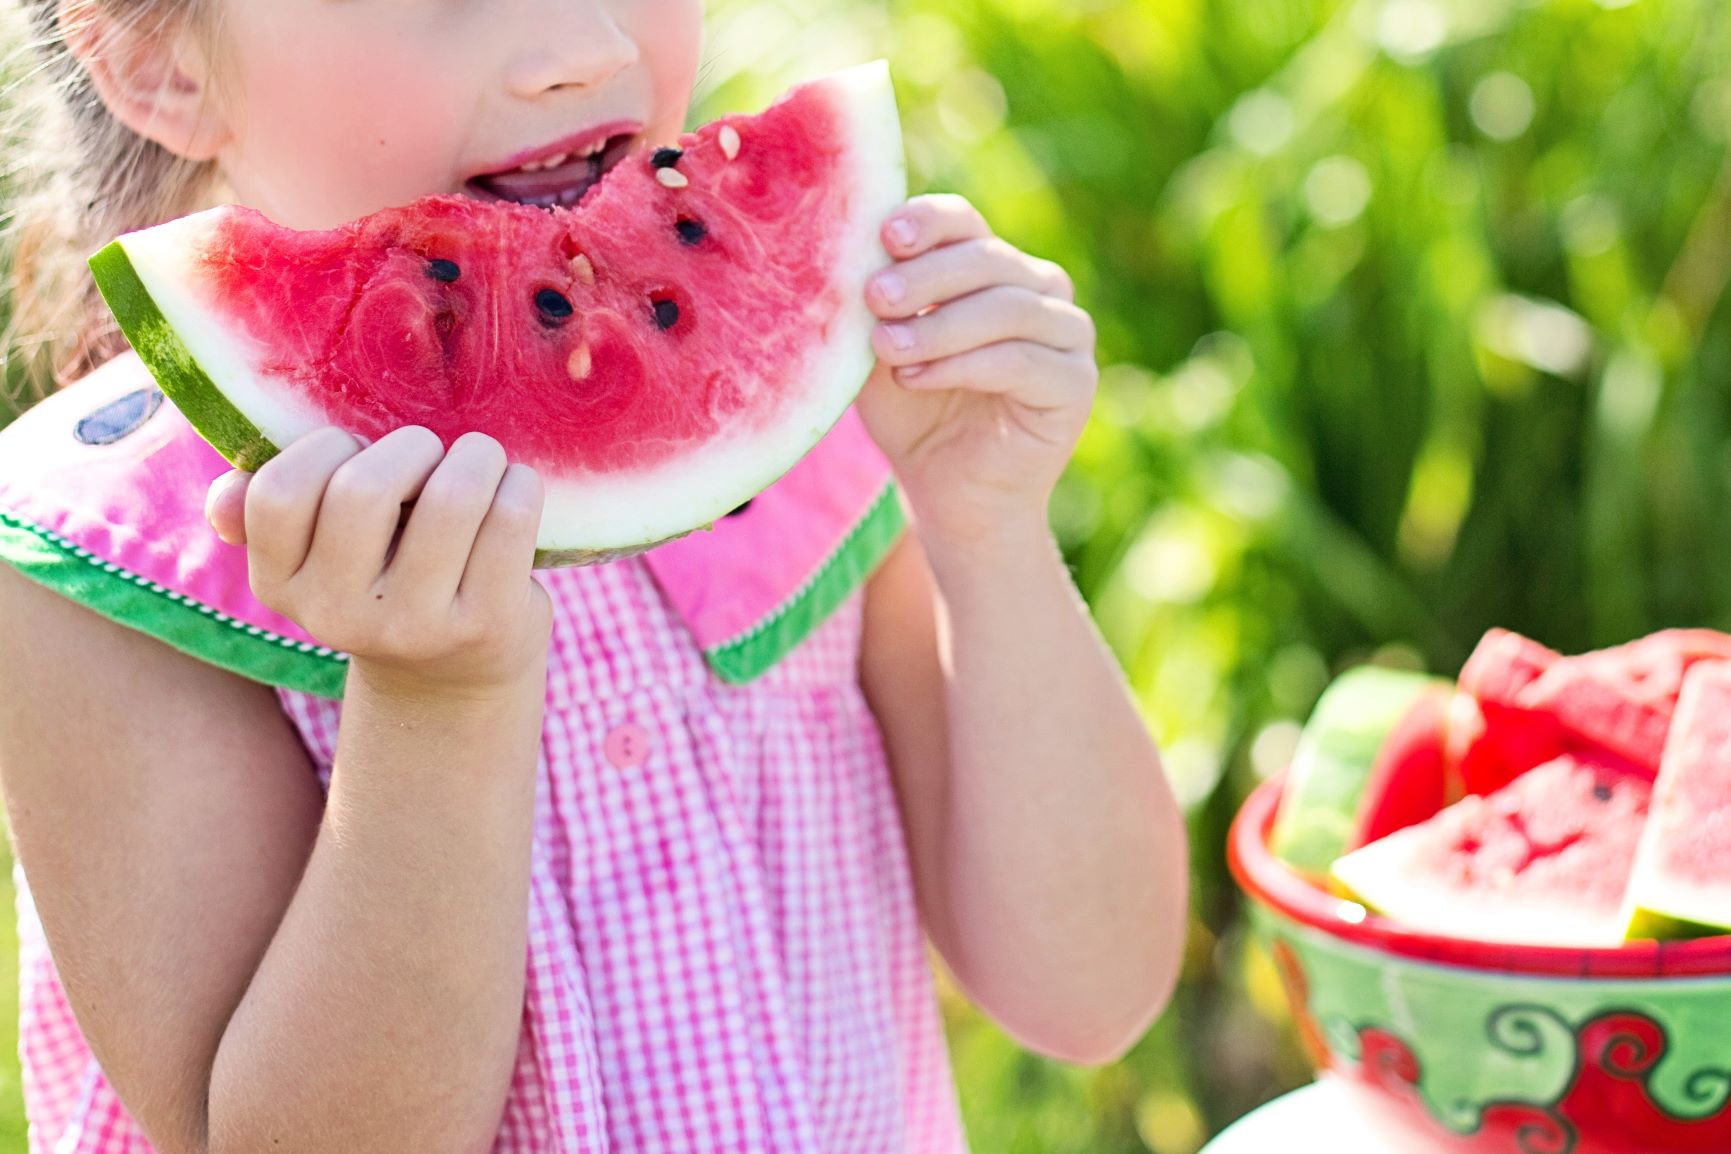 How To Teach Kids To Pick Up Healthy Habits - For Life!